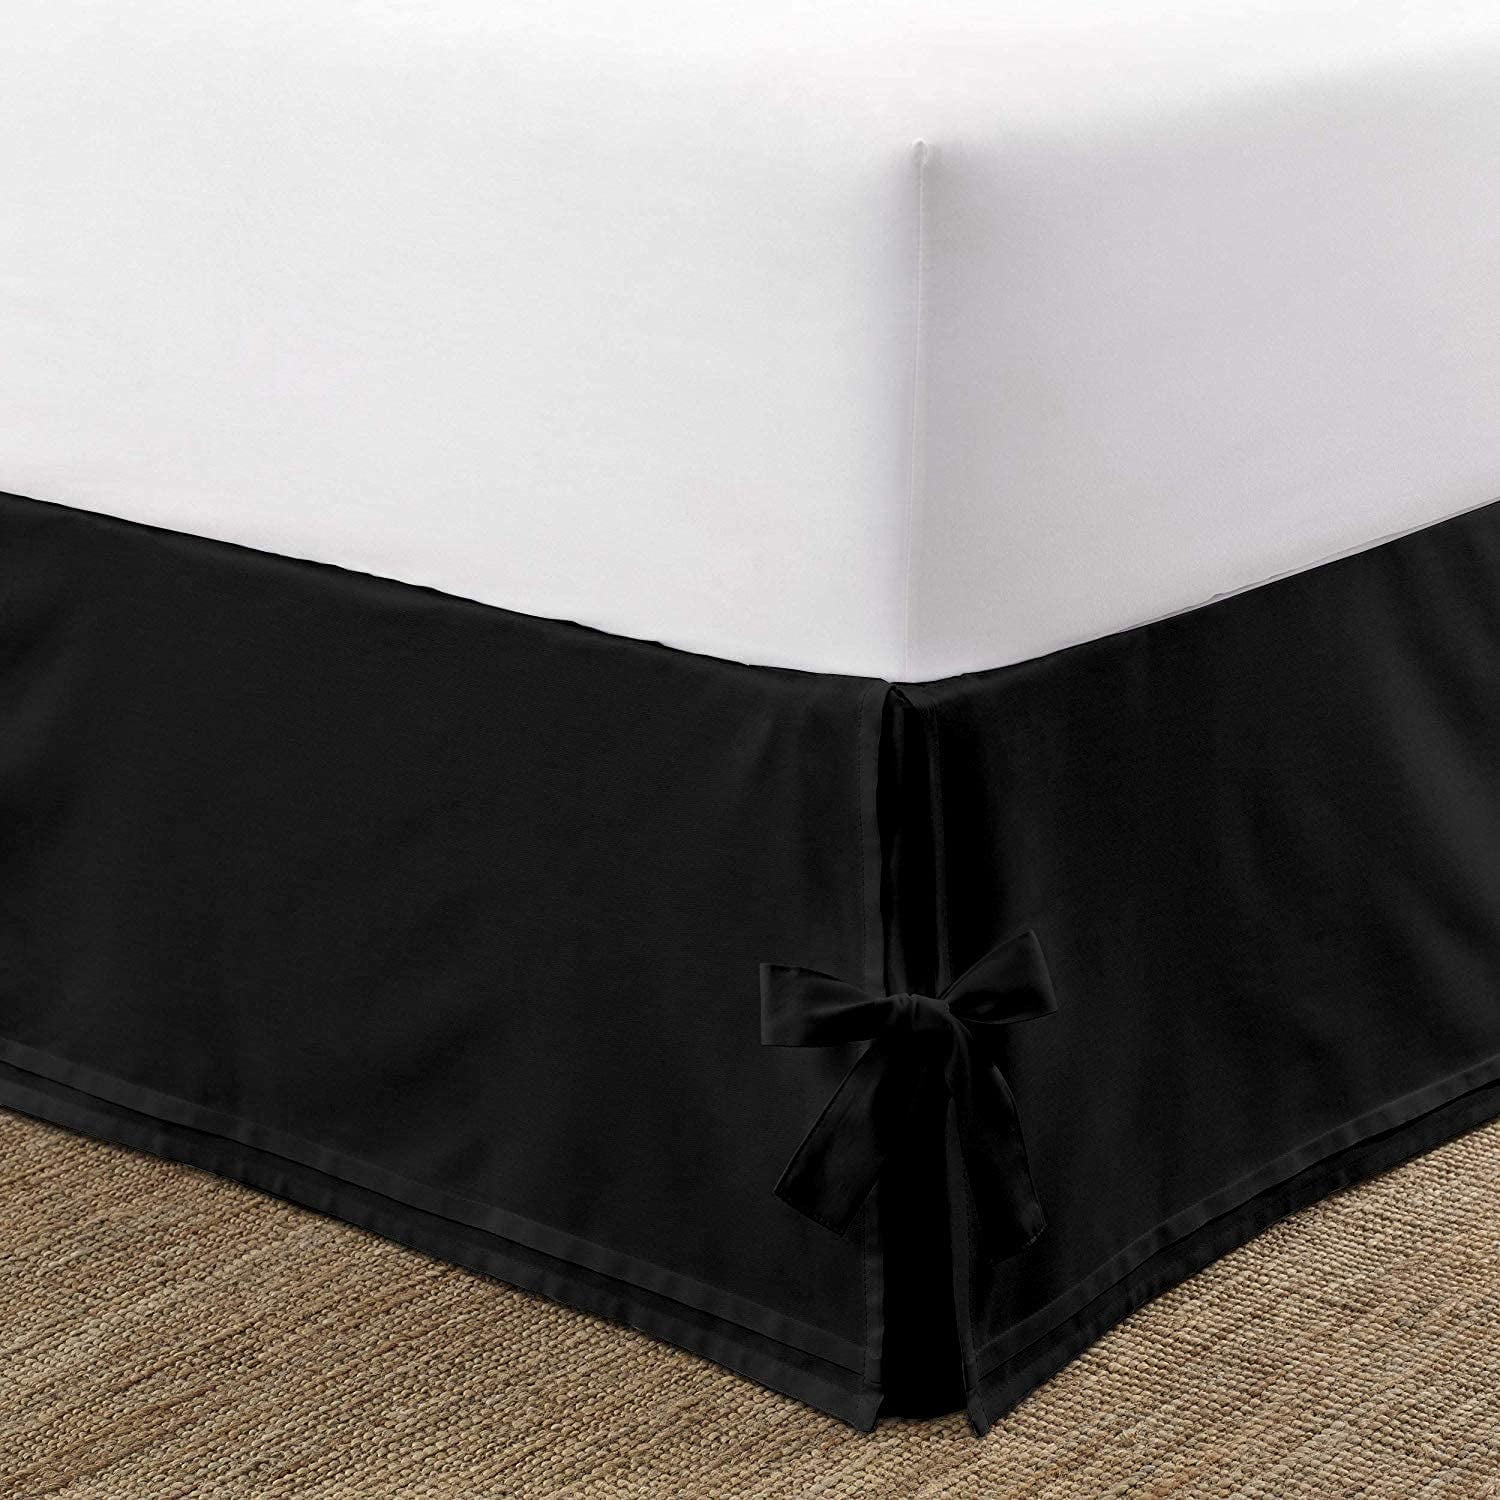 Dust Ruffle Bed Skirt 100% Egyptian Cotton 12 Inch Drop 800 Thread Count Wrinkle and Fade Resistant Ruffle Bed Skirt 72 x 84 California King Size Black Solid Inch 